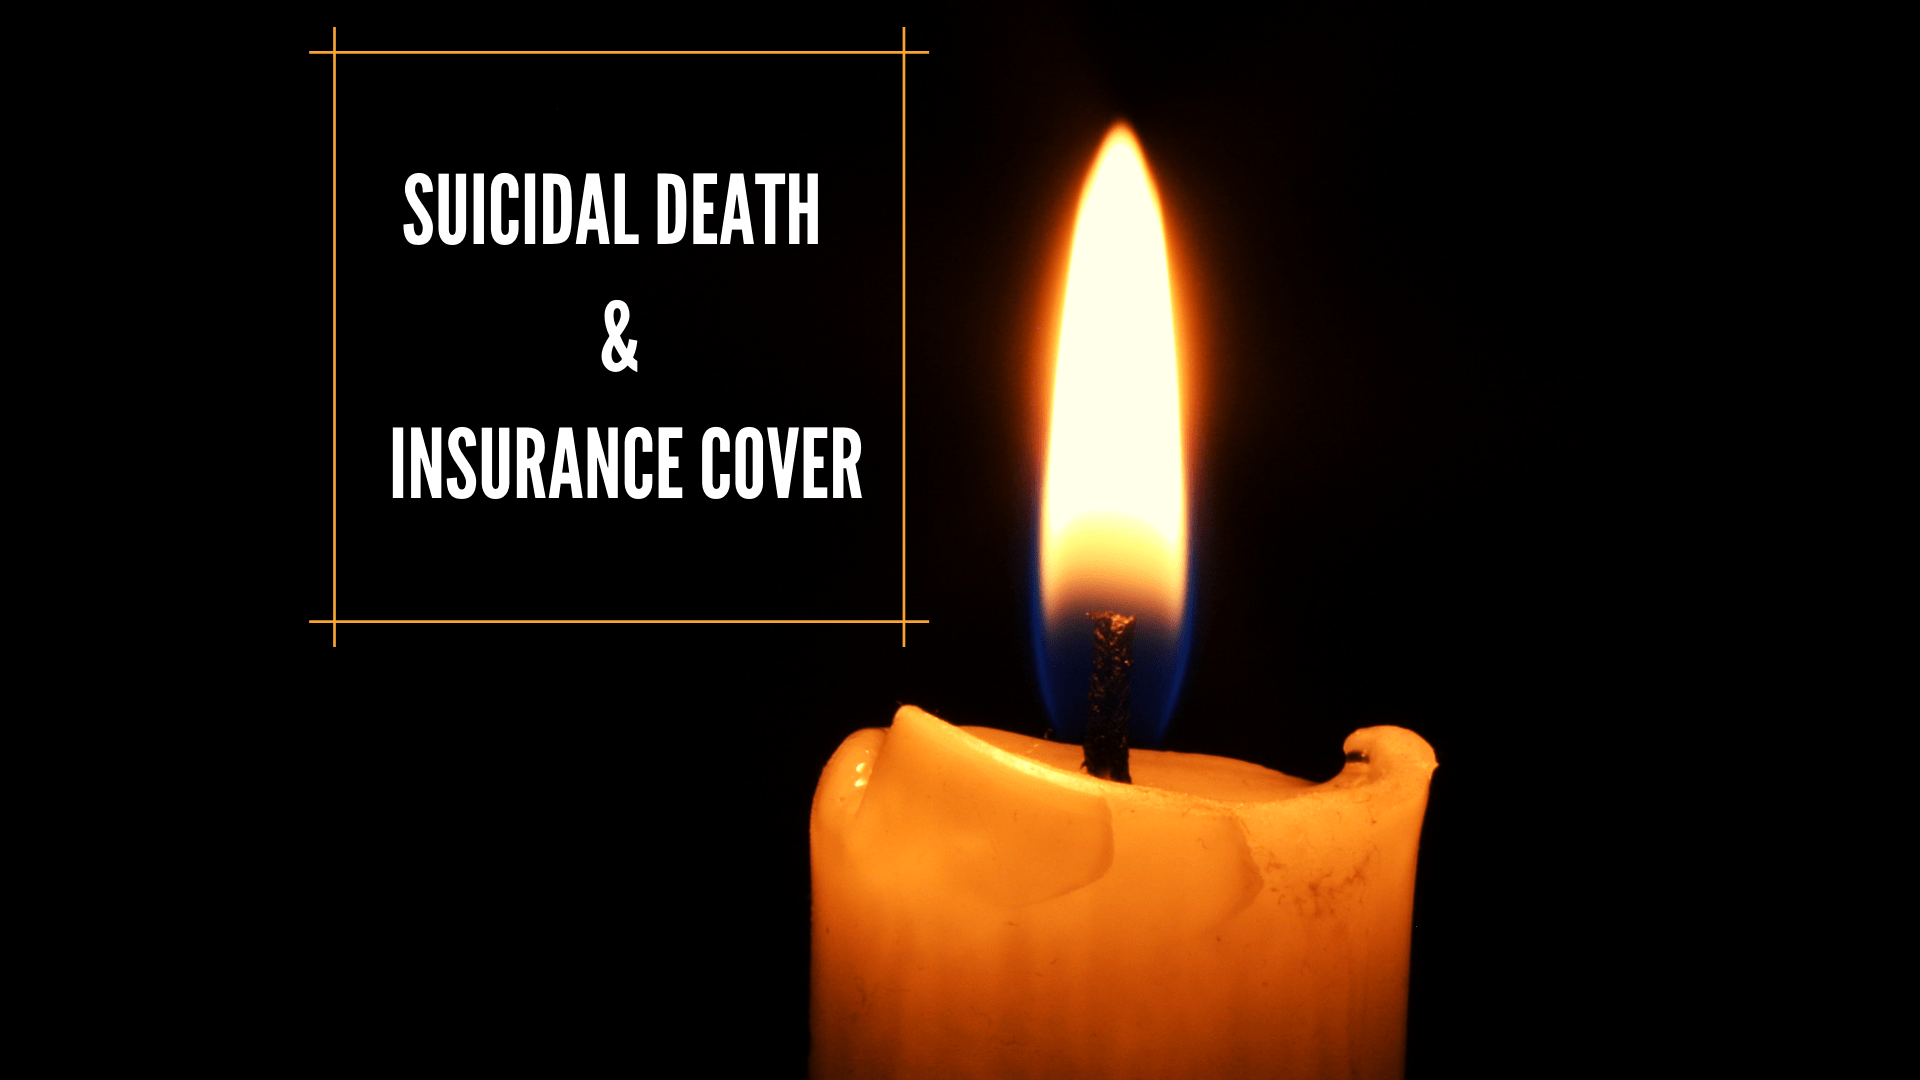 Is Suicide Covered Under Life Insurance Policy In India